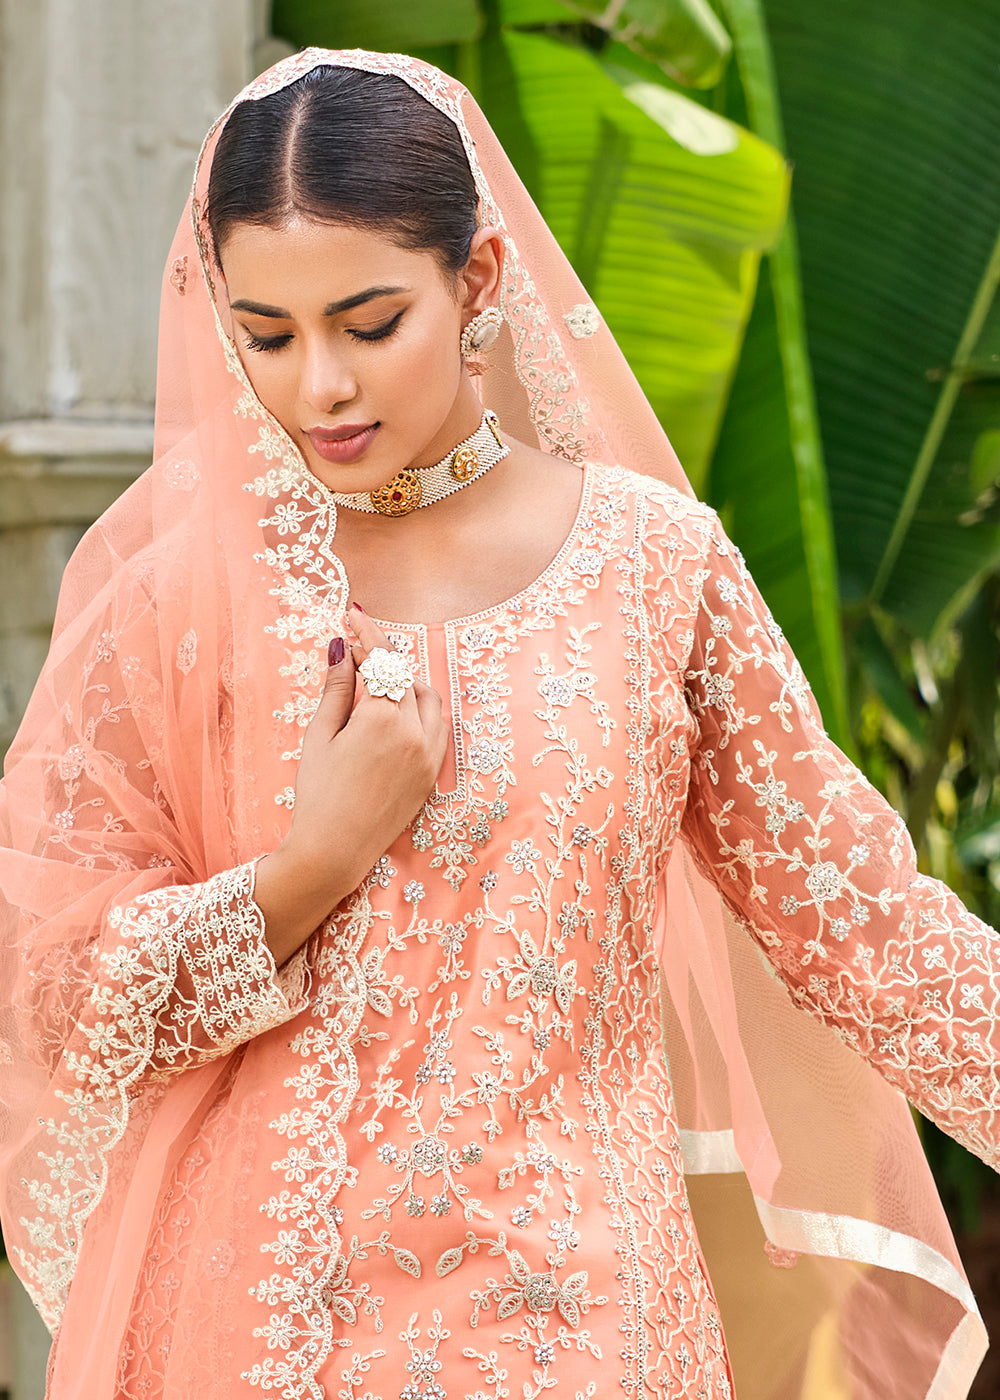 Buy Now Pretty Peach Stone & Cording Work Festive Palazzo Suit Online in USA, UK, Canada, Germany, Australia & Worldwide at Empress Clothing. 